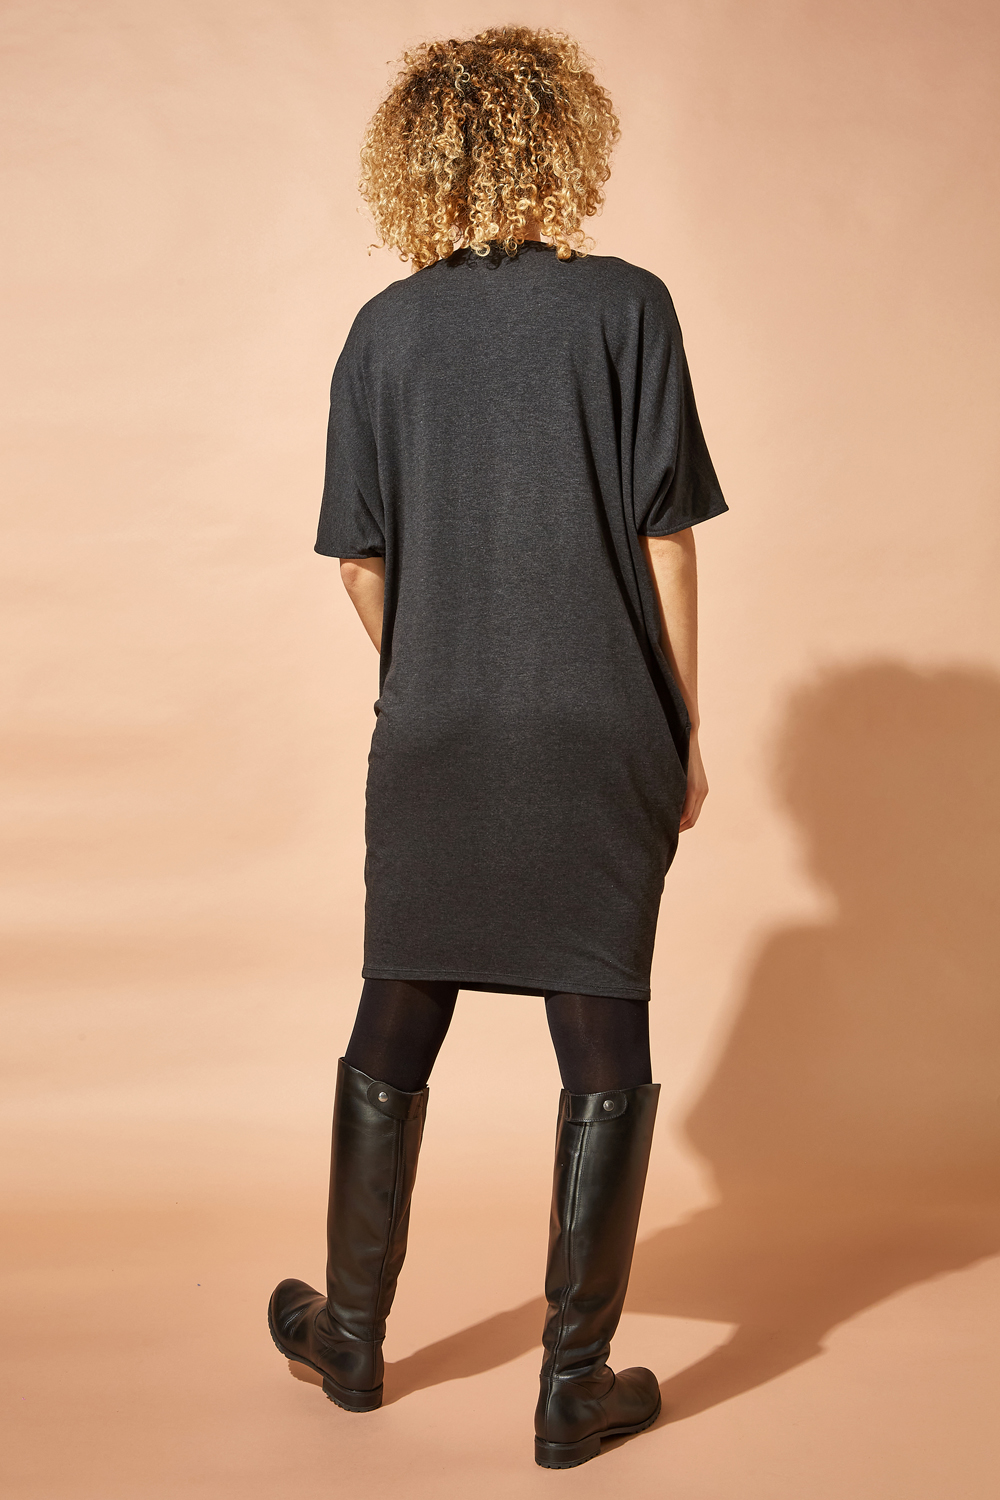 Charcoal Oversized Cocoon Dress, Image 3 of 4